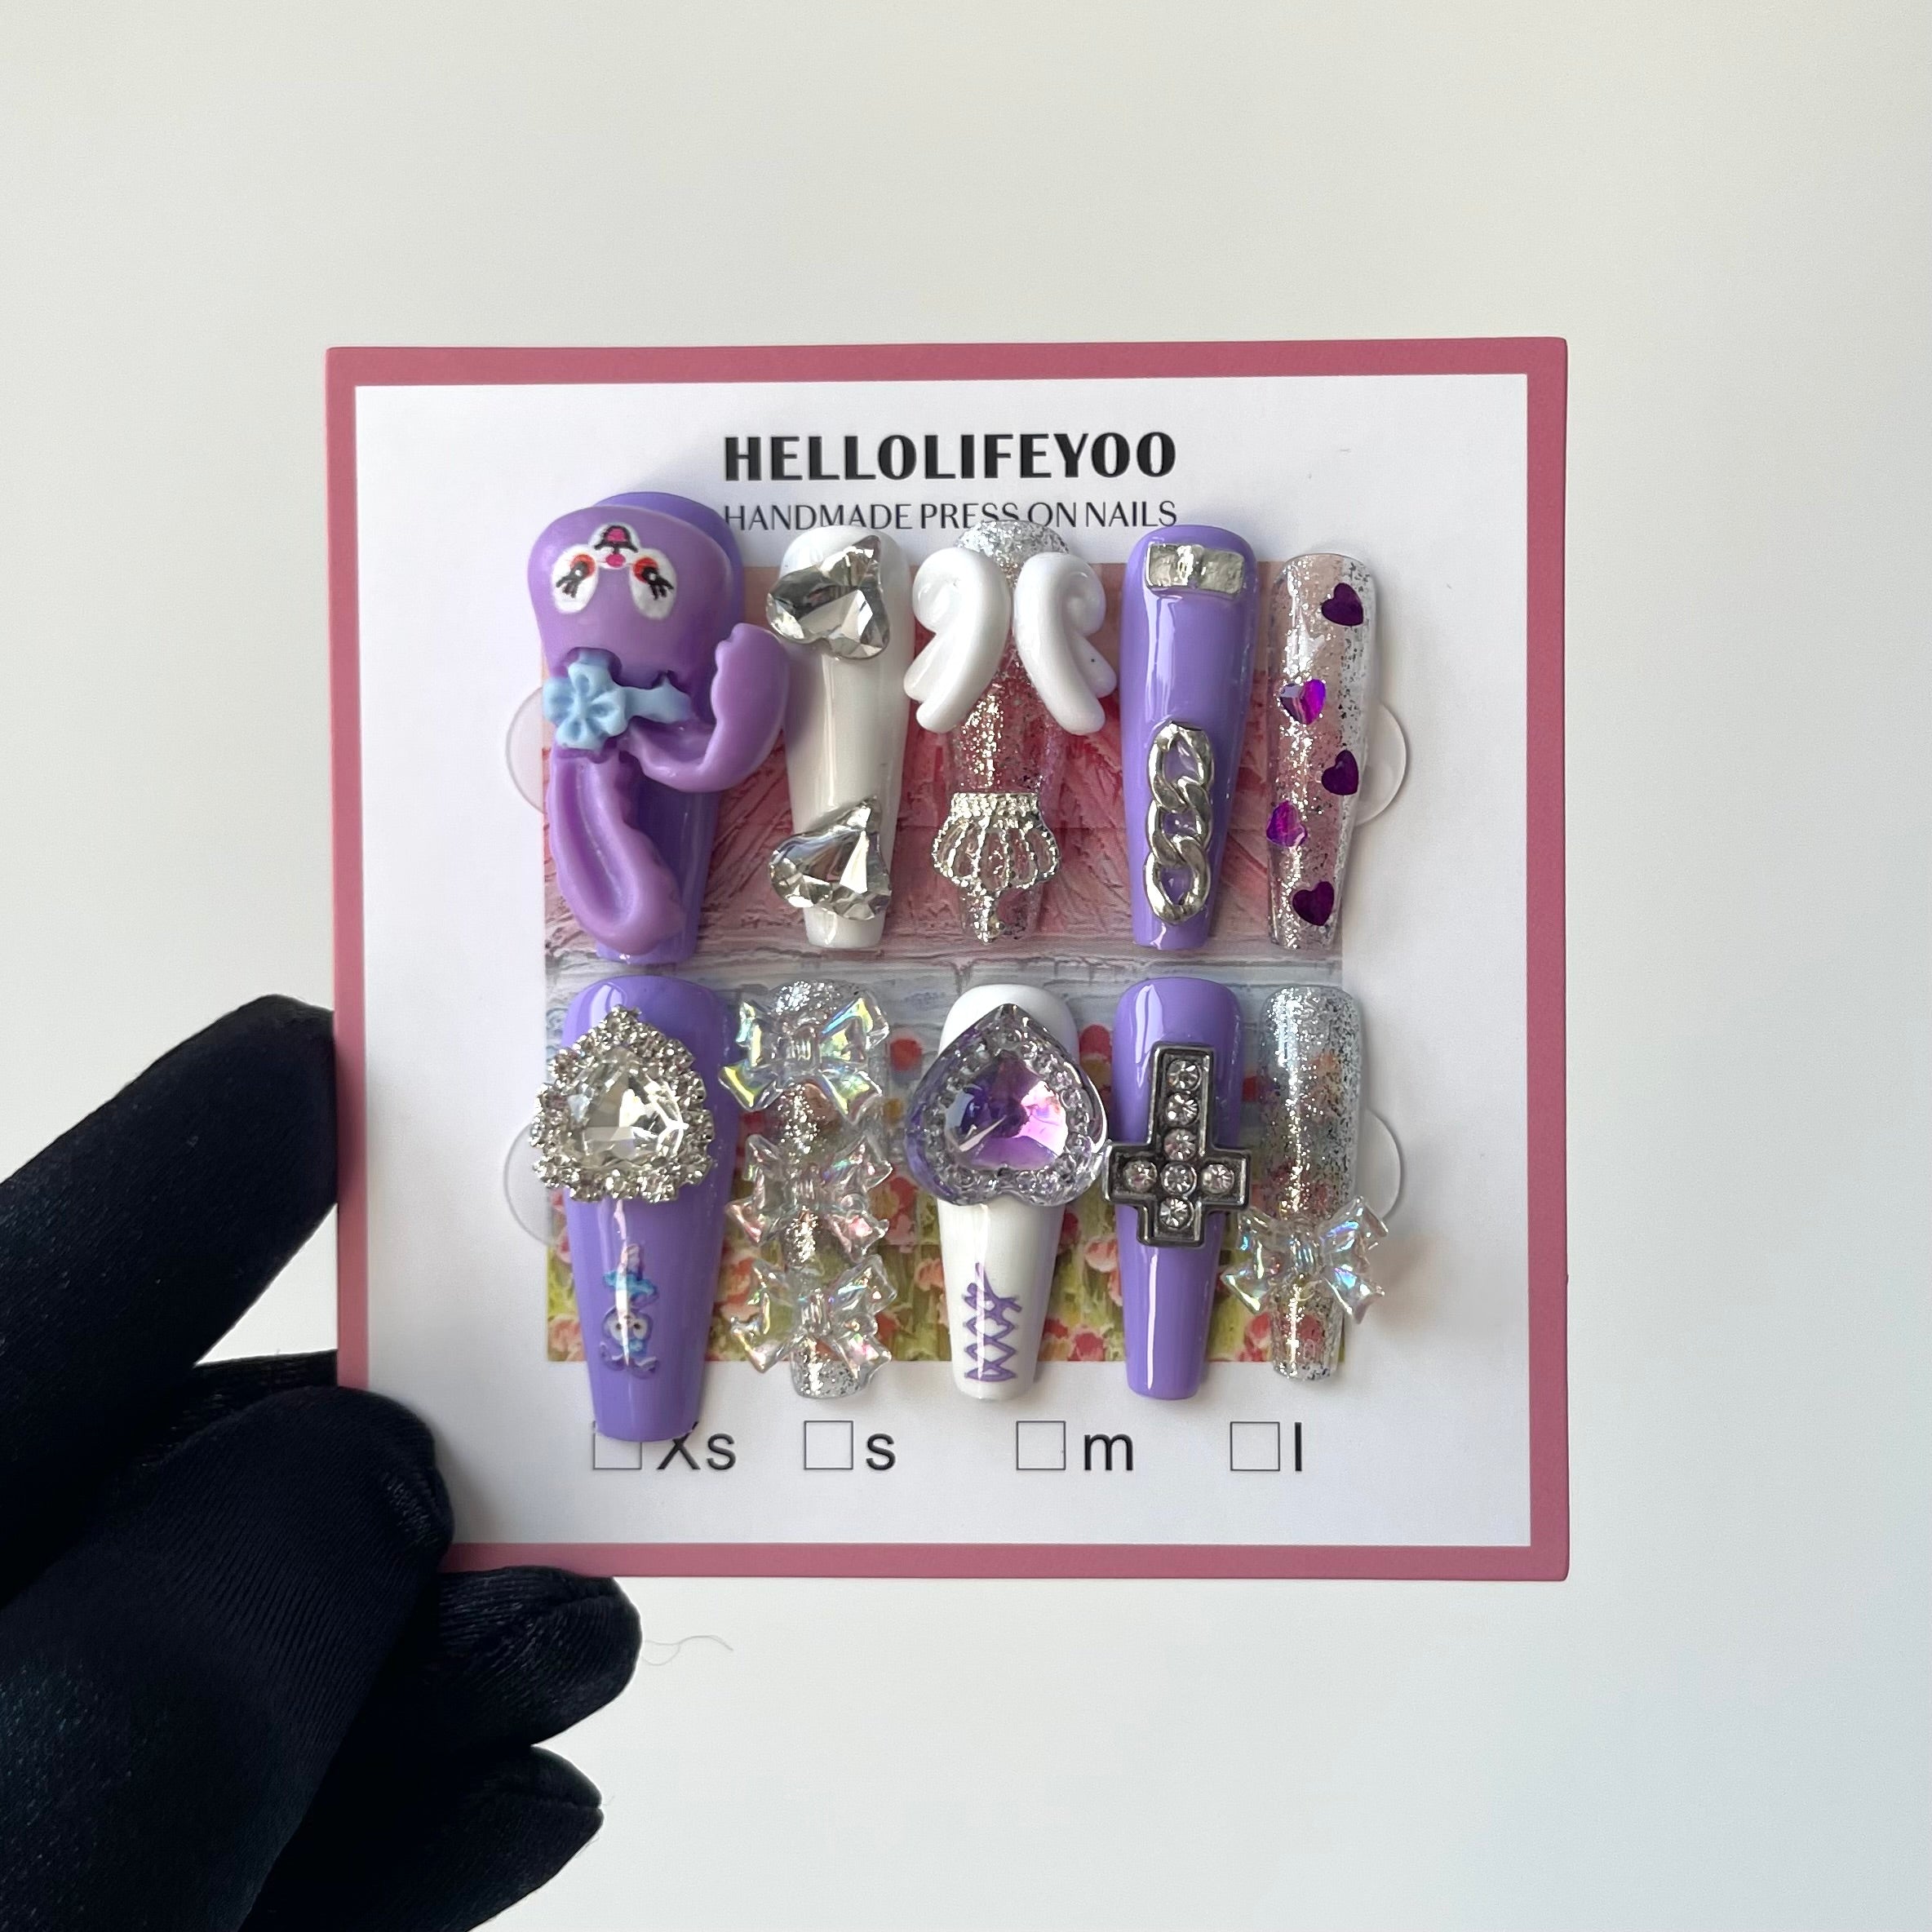 STELLALOU -TEN PIECES OF HANDCRAFTED PRESS ON NAIL